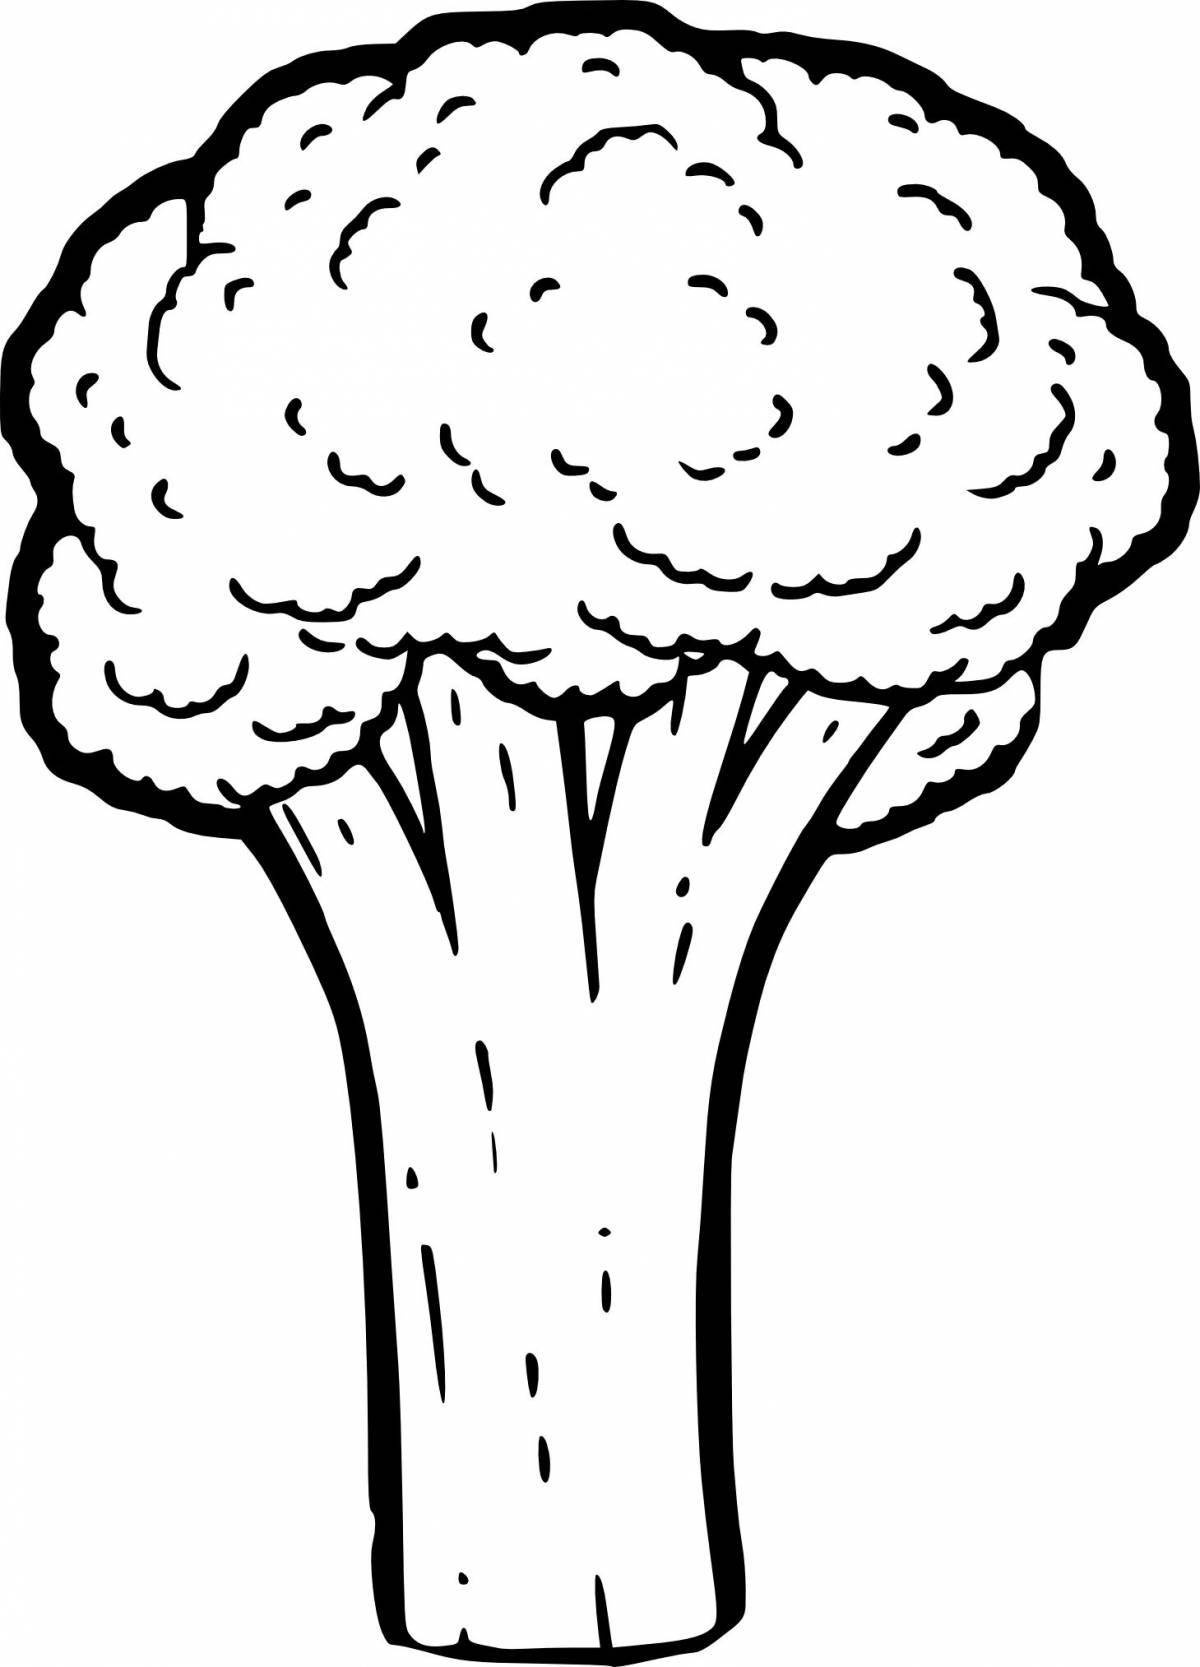 Playful broccoli coloring page